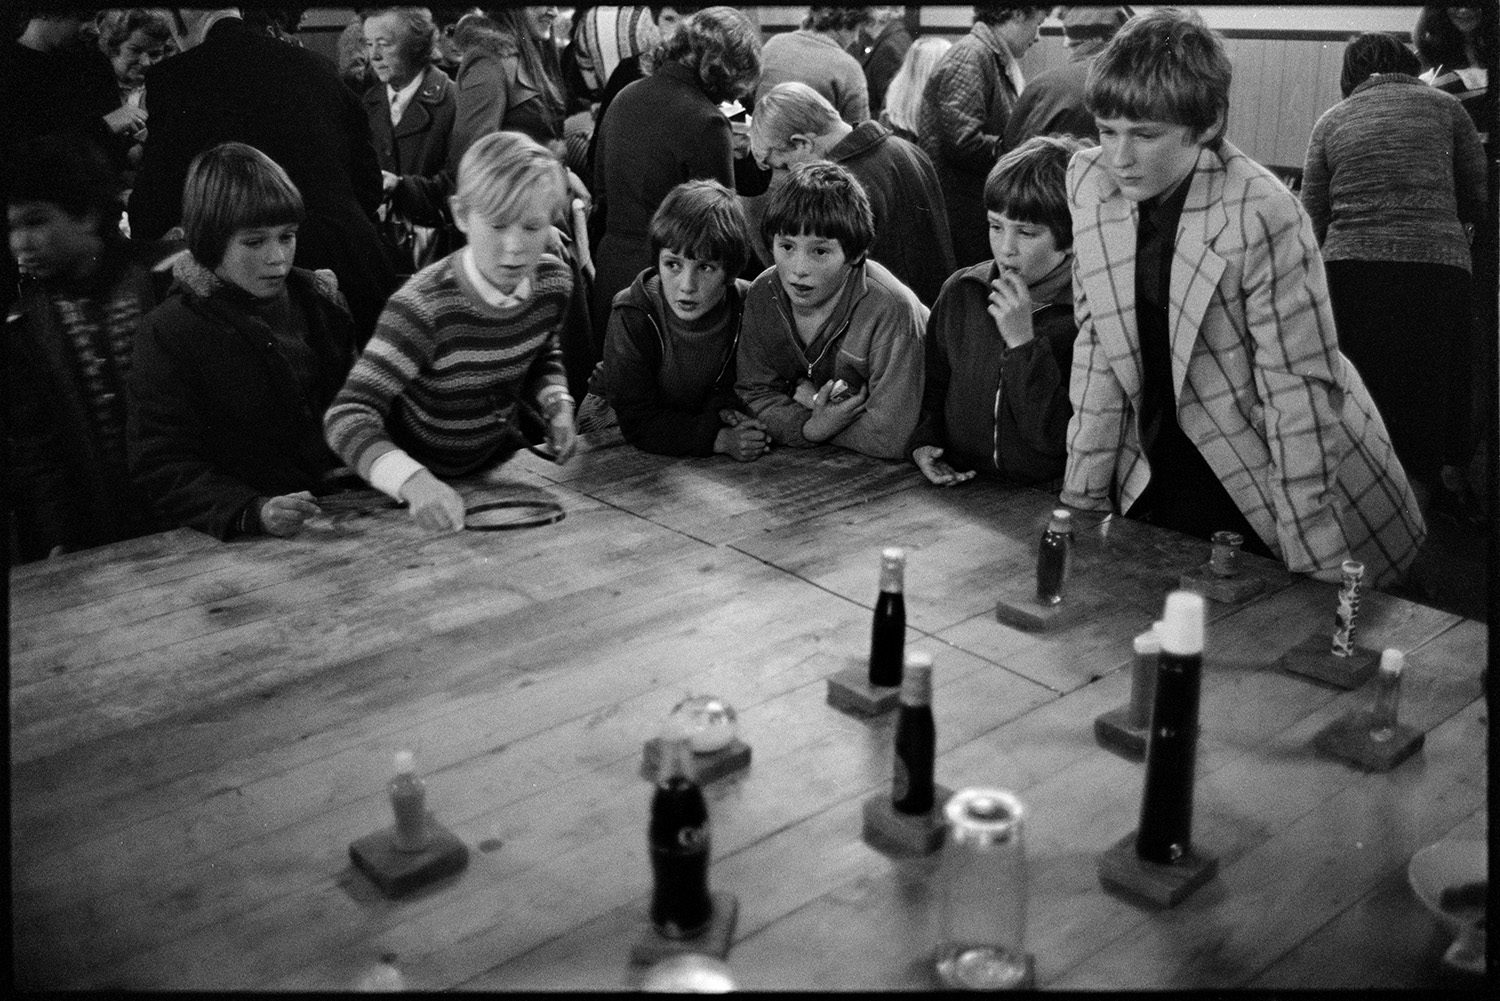 Christmas sale in village hall games and jumble.
[A group of children and watching a boy playing a hoop-la game at a Christmas sale in Dolton Village Hall. A crowd at the sale can be seen in the background.]